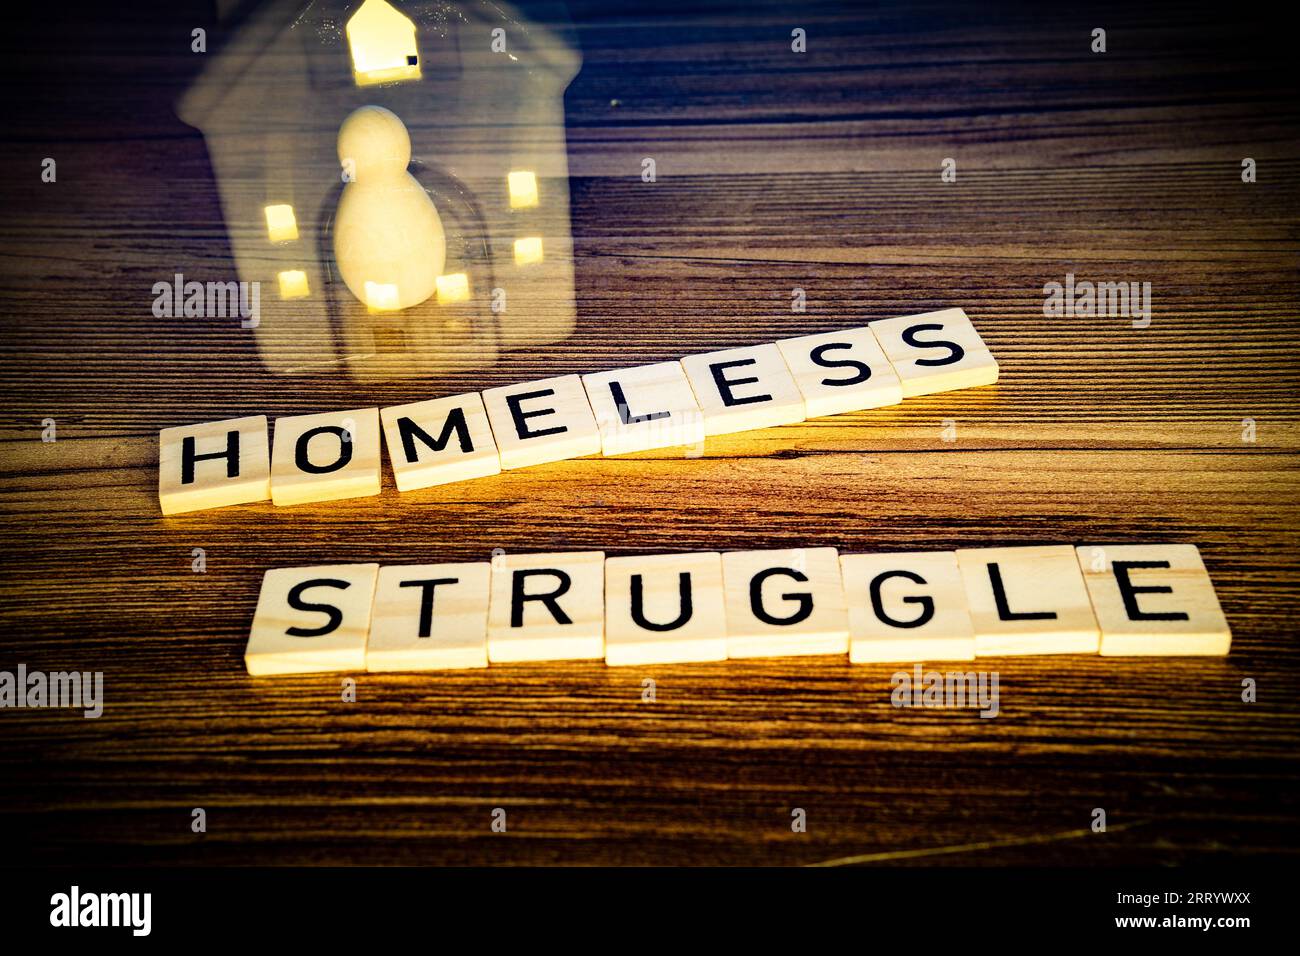 homeless struggle in wooden letters on a wood background, a figure in vanishing house Stock Photo